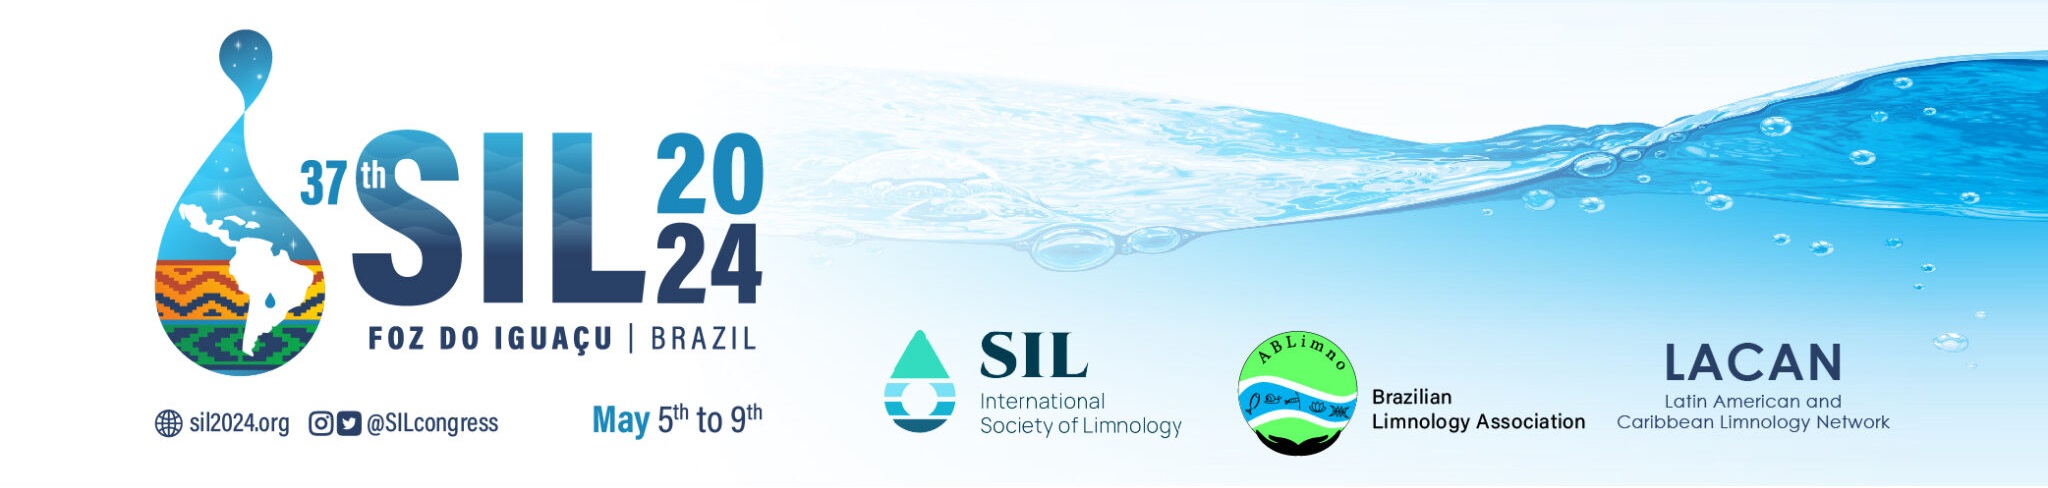 37º Congress of International Society of Limnology